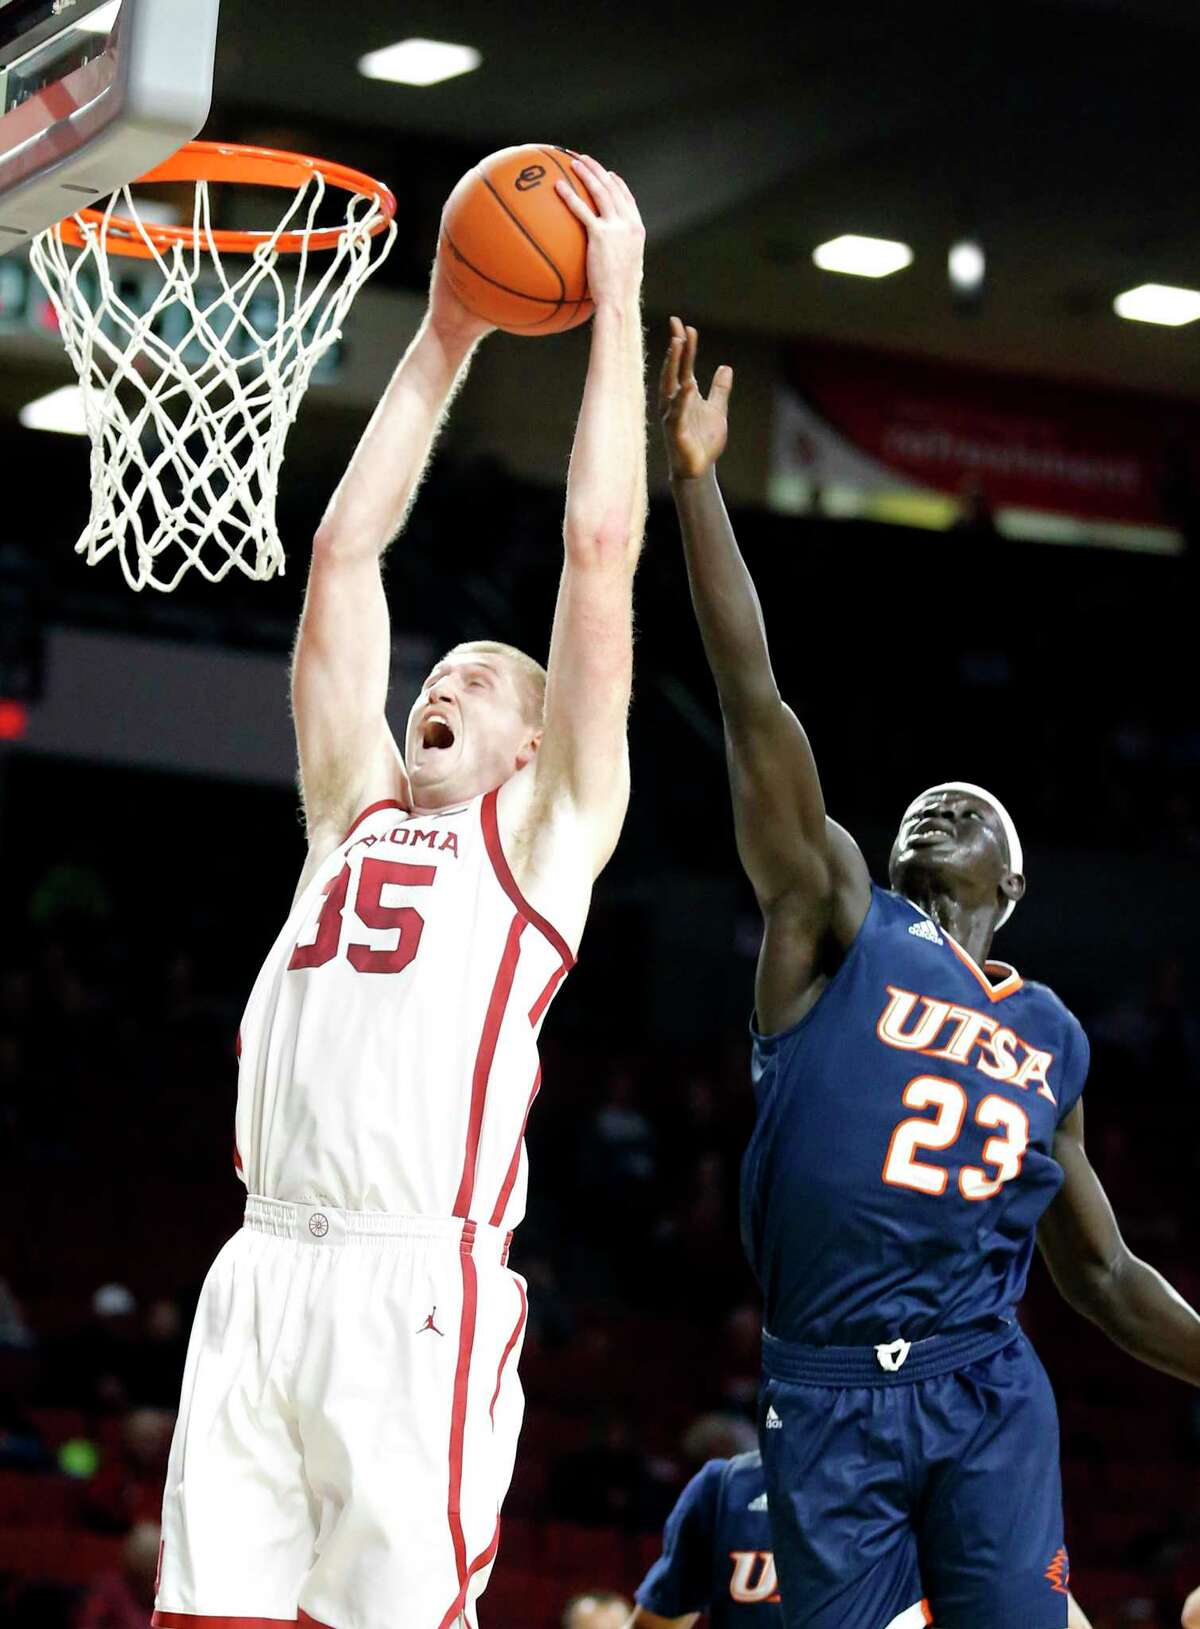 Oklahoma's Brady Manek (35) goes up for a basketa as UTSA's Atem Bior (23) defends during the college basketball game between the University of Oklahoma and the UTSA Roadrunners at the Lloyd Noble Center in Norman, Okla., Tuesday, Nov. 5, 2019. [Sarah Phipps/The Oklahoman]